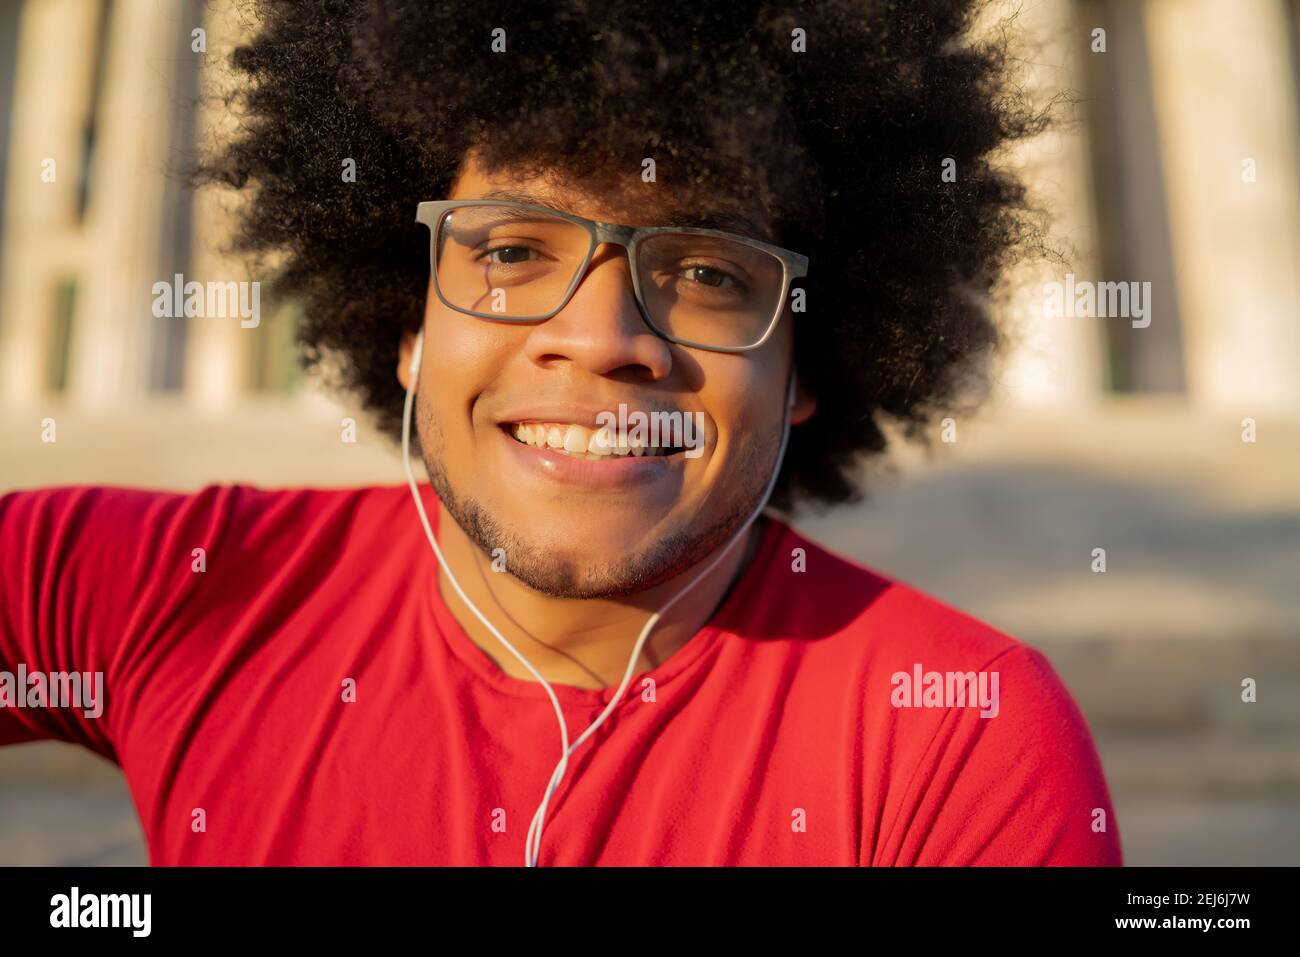 Portrait of young latin man outdoors. Stock Photo